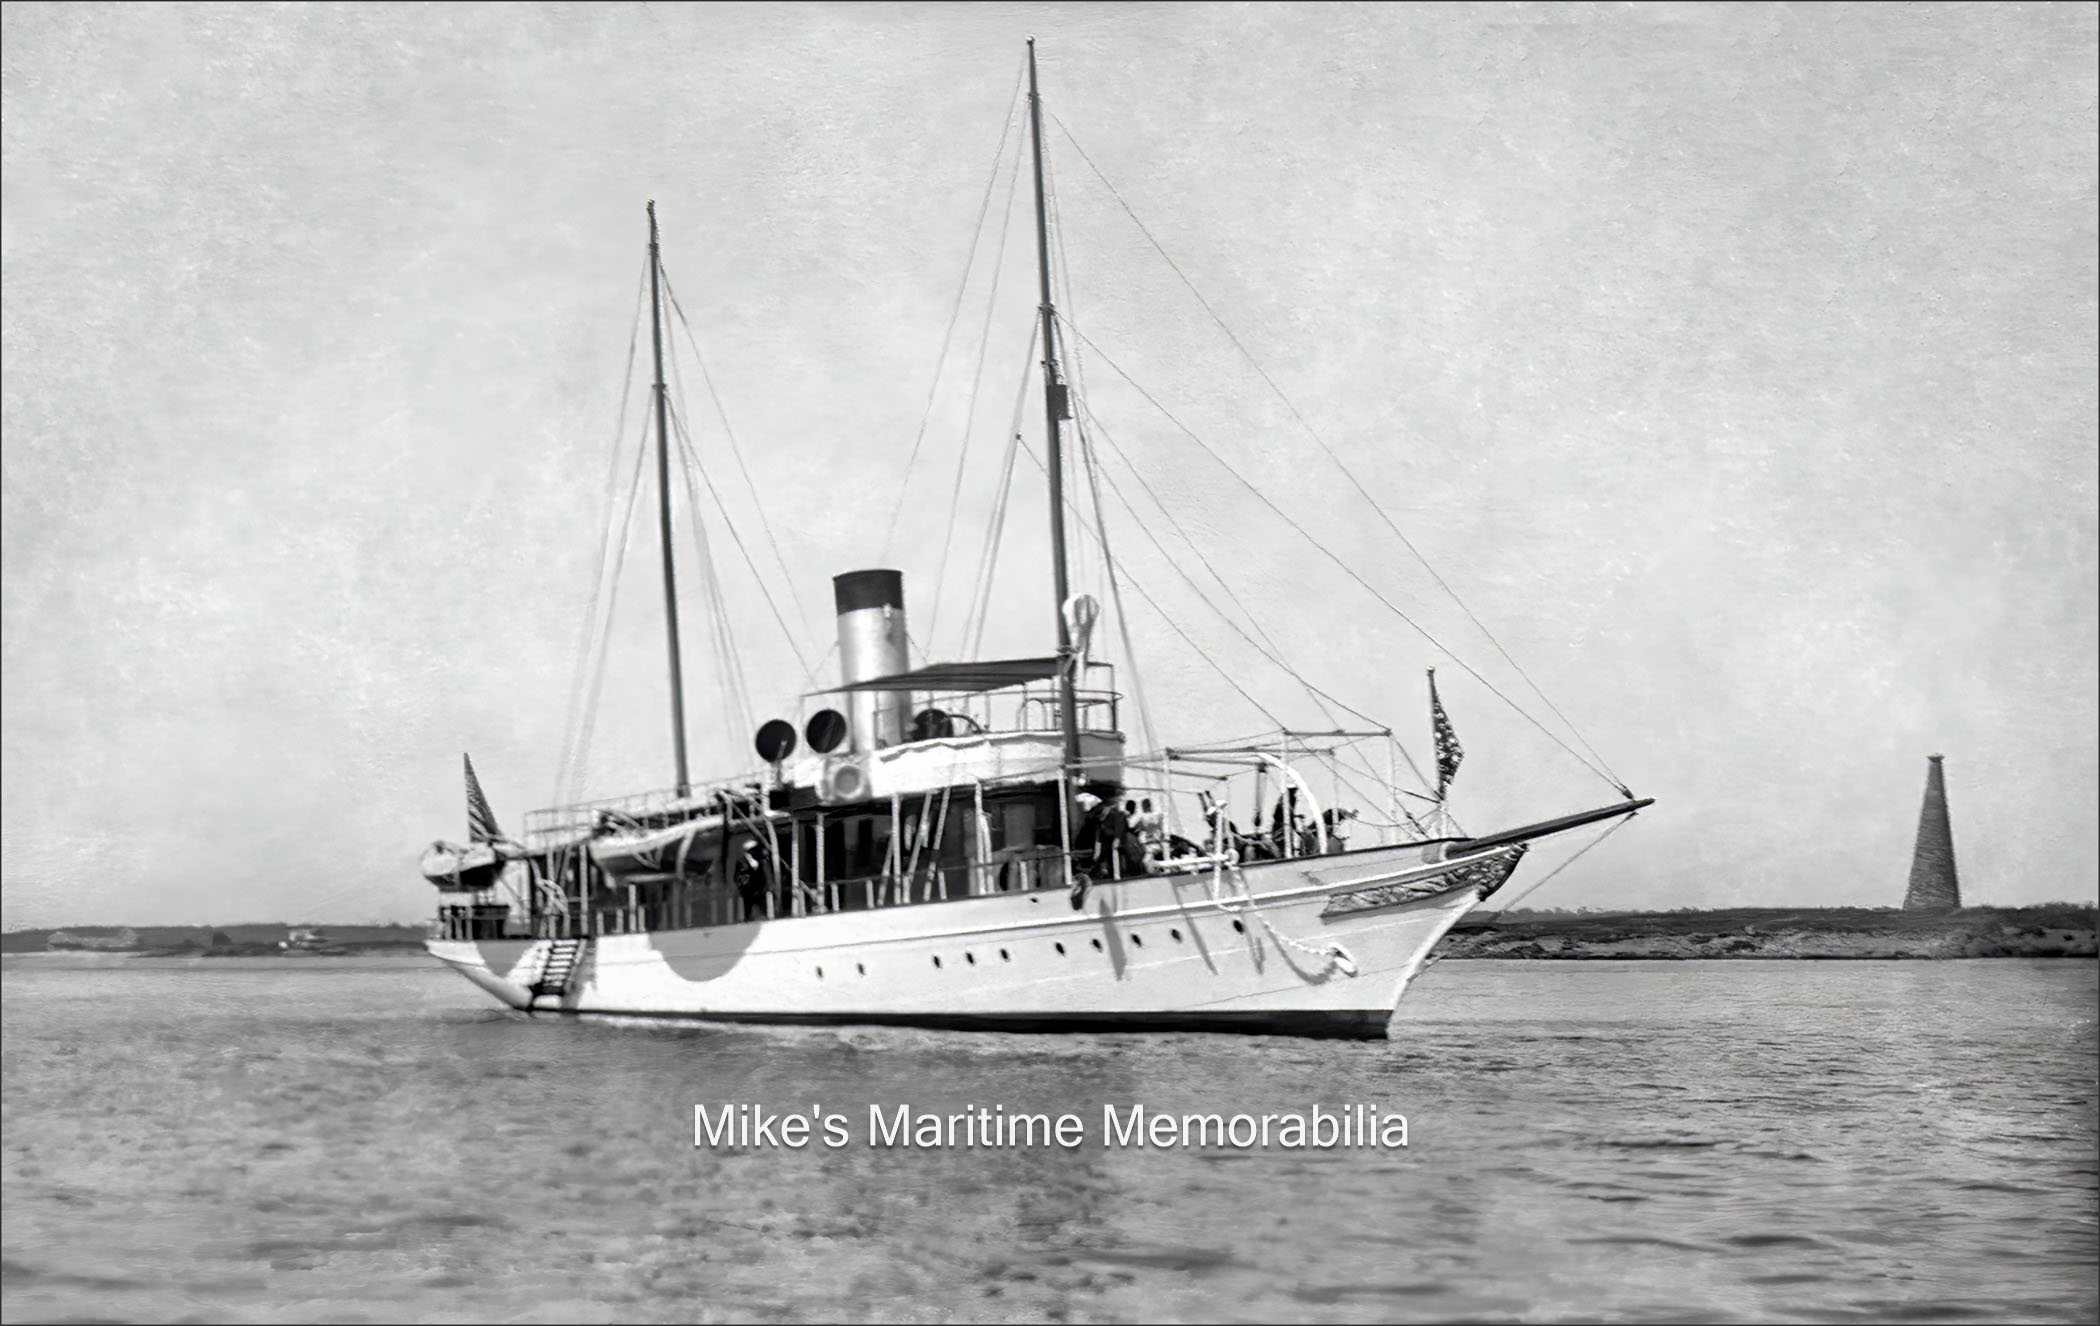 SYLPH, Brooklyn, NY – 1909 This rare 1909 photo of the "SYLPH" depicts her during her tenure as the official United States Presidential Yacht for President Theodore Roosevelt. The US Navy originally purchased the "SYLPH" in June 1898 from her builder, John Roach & Co., Chester, PA, and they commissioned the vessel as a Presidential Yacht on August 18, 1898 at the Norfolk Navy Yard. The "SYLPH" served in this capacity for Presidents McKinley (1898-1901), Roosevelt (1901-1909), Taft (1909-1913) and Wilson (1913-1921). In 1921, the Navy re-designated her as Patrol Yacht "PY-5" and she sailed on the Potomac and Anacostia Rivers. In 1925, she was permanently moored at the Washington Navy Yard, where she remained until her decommissioning in April 1929. Frank B. Clair of Brooklyn, New York purchased her in November 1929 (Mr. Clair was reportedly an ex-bootlegger.) Mr. Clair and his partner Captain John Nugent converted her into a party fishing boat and operated her from Sheepshead Bay, Brooklyn, NY. In 1935, her boiler failed and she was re-powered with a 400 HP Worthington diesel engine. Also during 1935, Jeremiah 'Jerry' Driscoll purchased Mr. Clair's share of the business. She continued fishing from Sheepshead Bay until April 1939, when she changed her business and ran a ferry service from Sea Gate, Brooklyn to the Battery in Manhattan. Alas, in 1941, her owners defaulted on the mortgage held by the Worthington Diesel Company and they took possession of the vessel. The "SYLPH" is the only vessel in history to go from presidents to porgies.